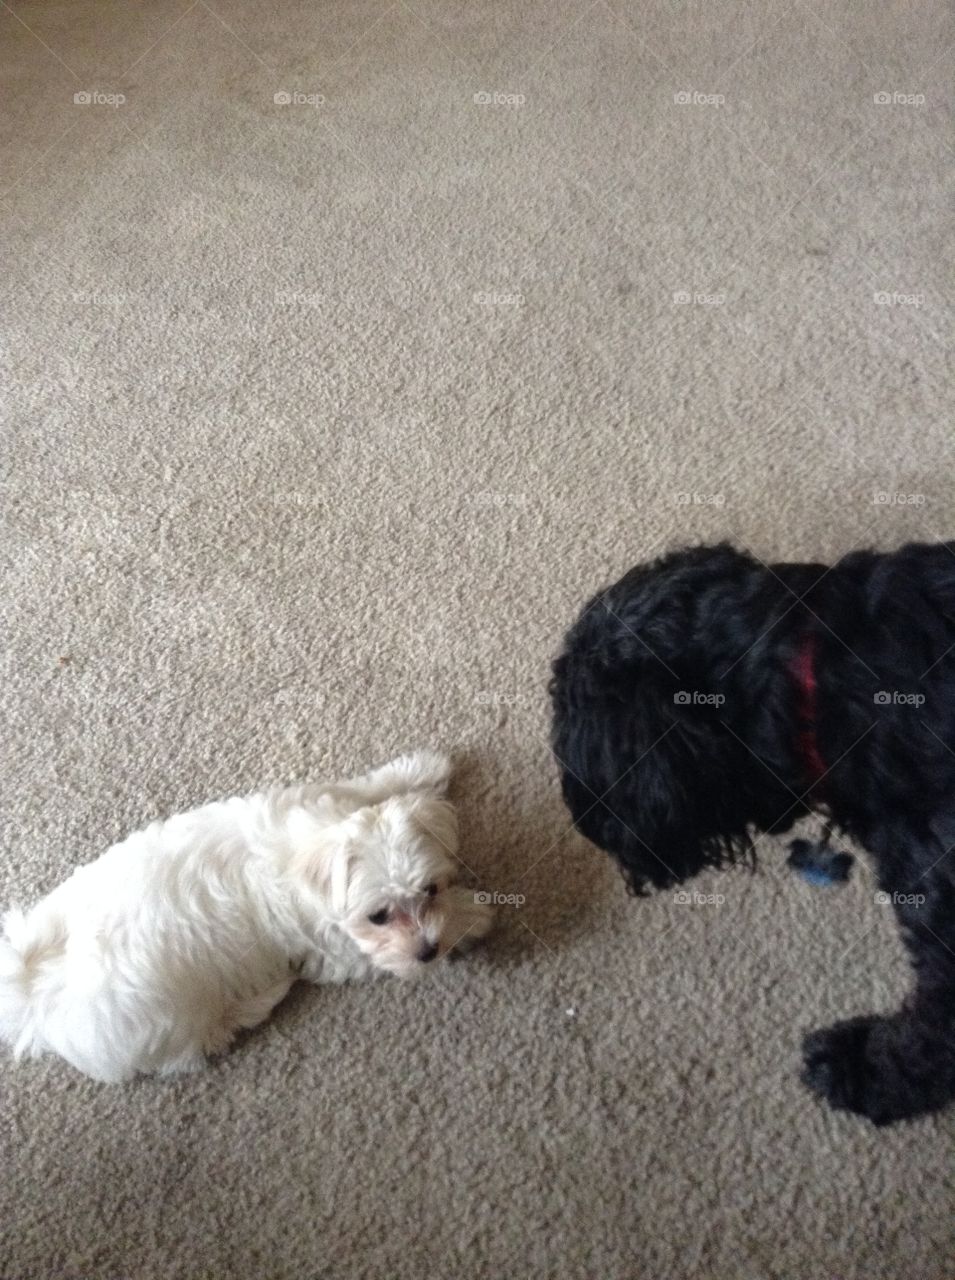 Sophie (a Yorky and Maltese mix) and Coal (a cockerspaniel and poodle mix) :)